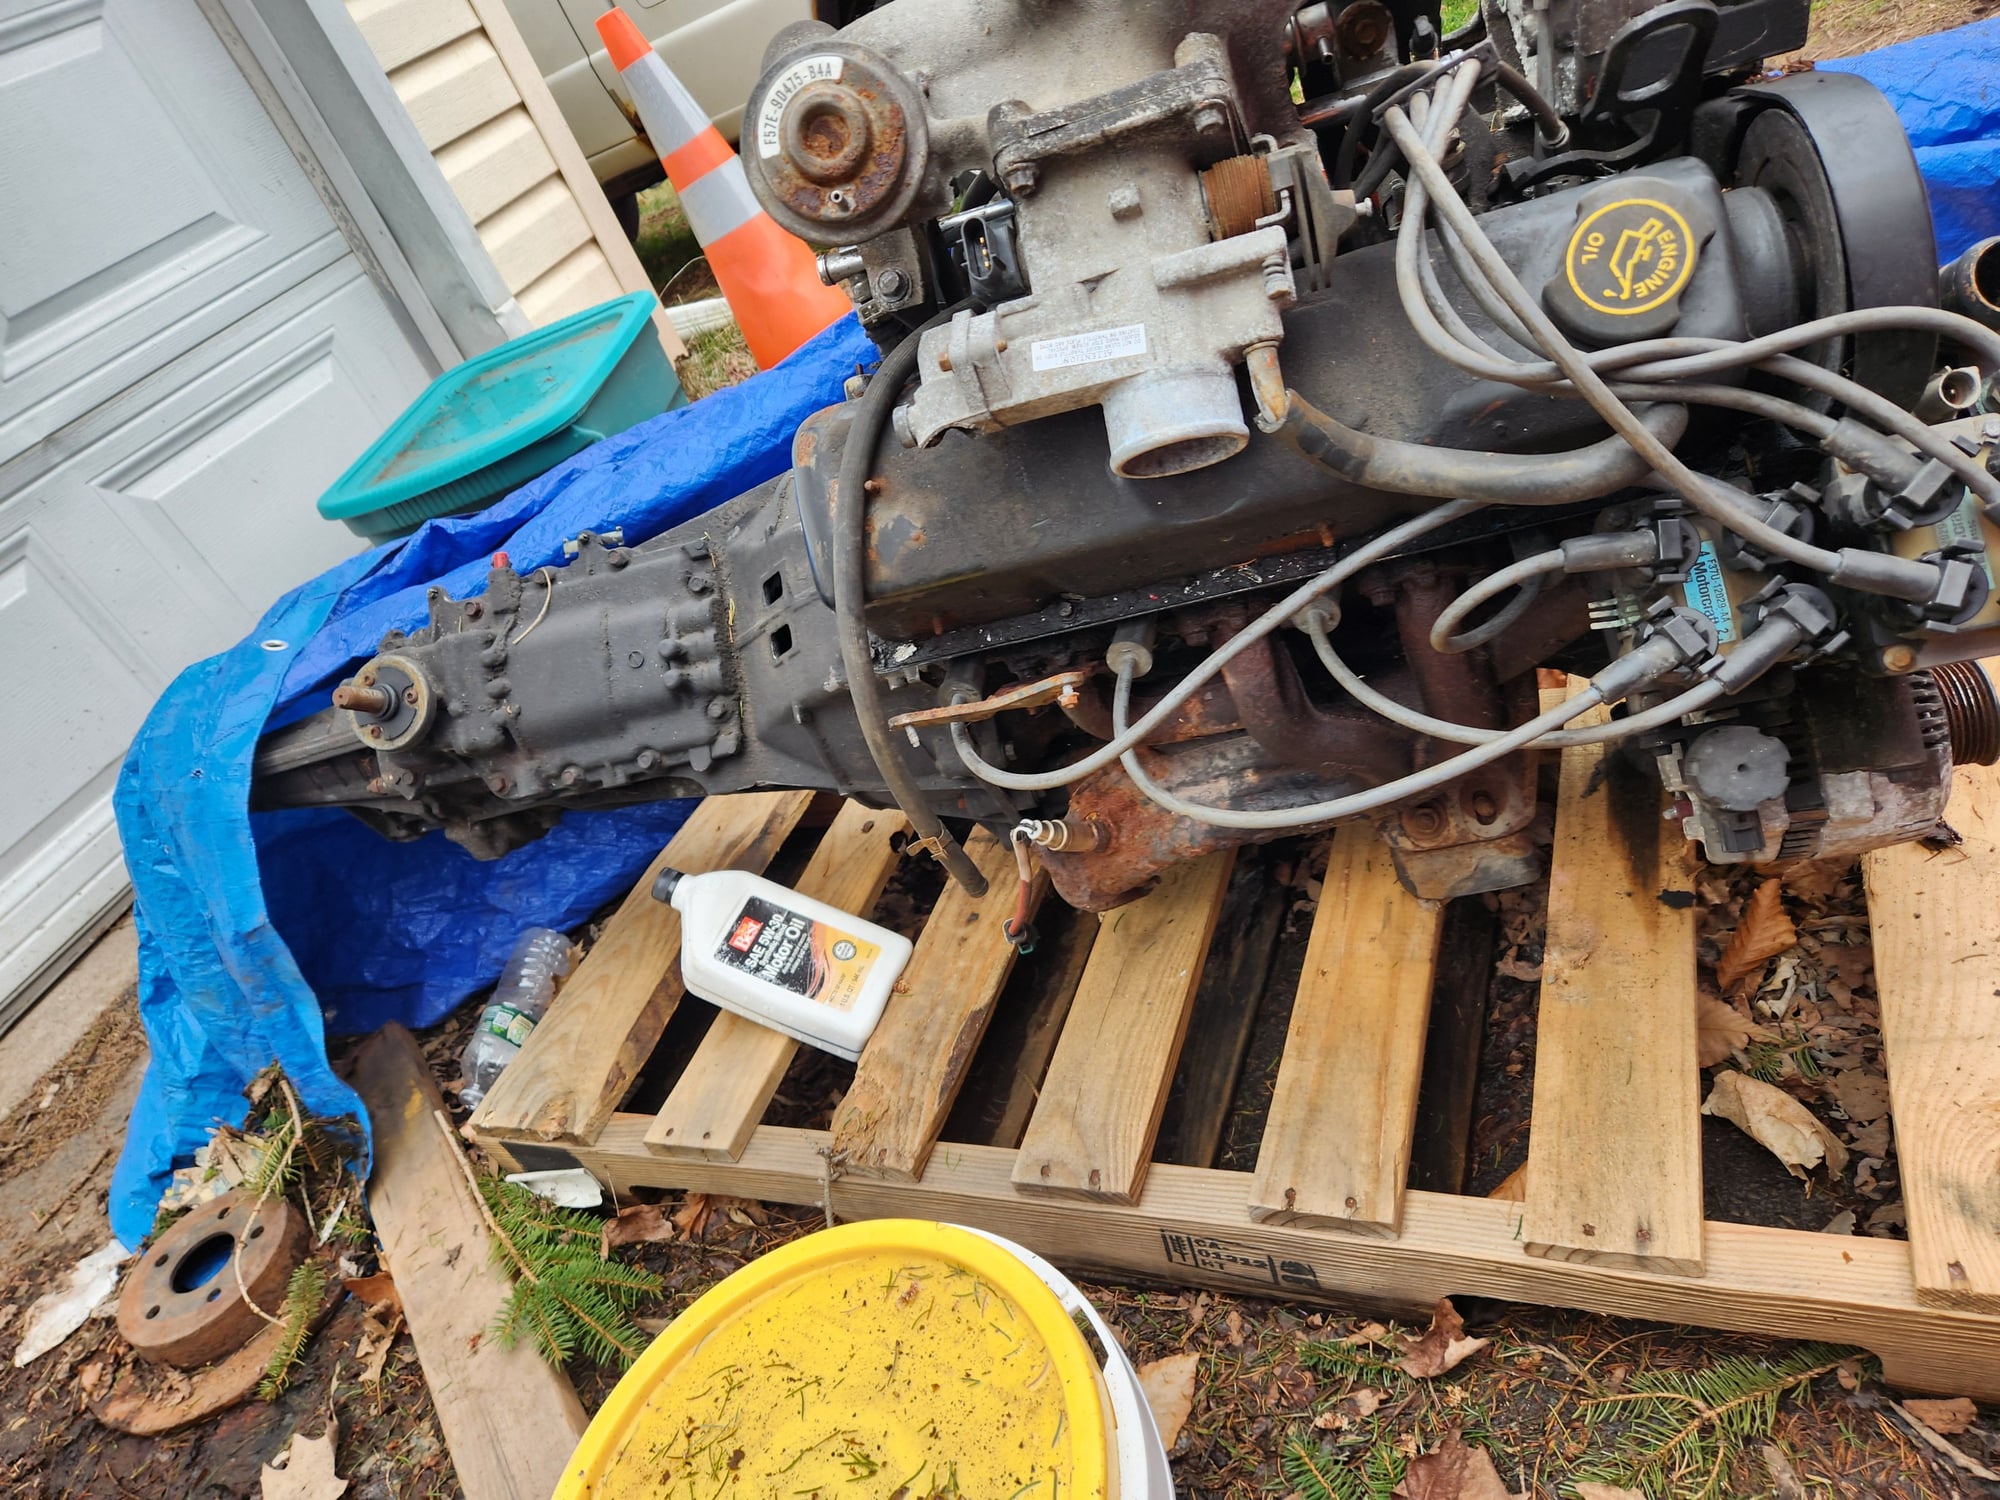 Drivetrain - 98 ranger engine and transmission - Used - All Years  All Models - Ontario, NY 14519, United States